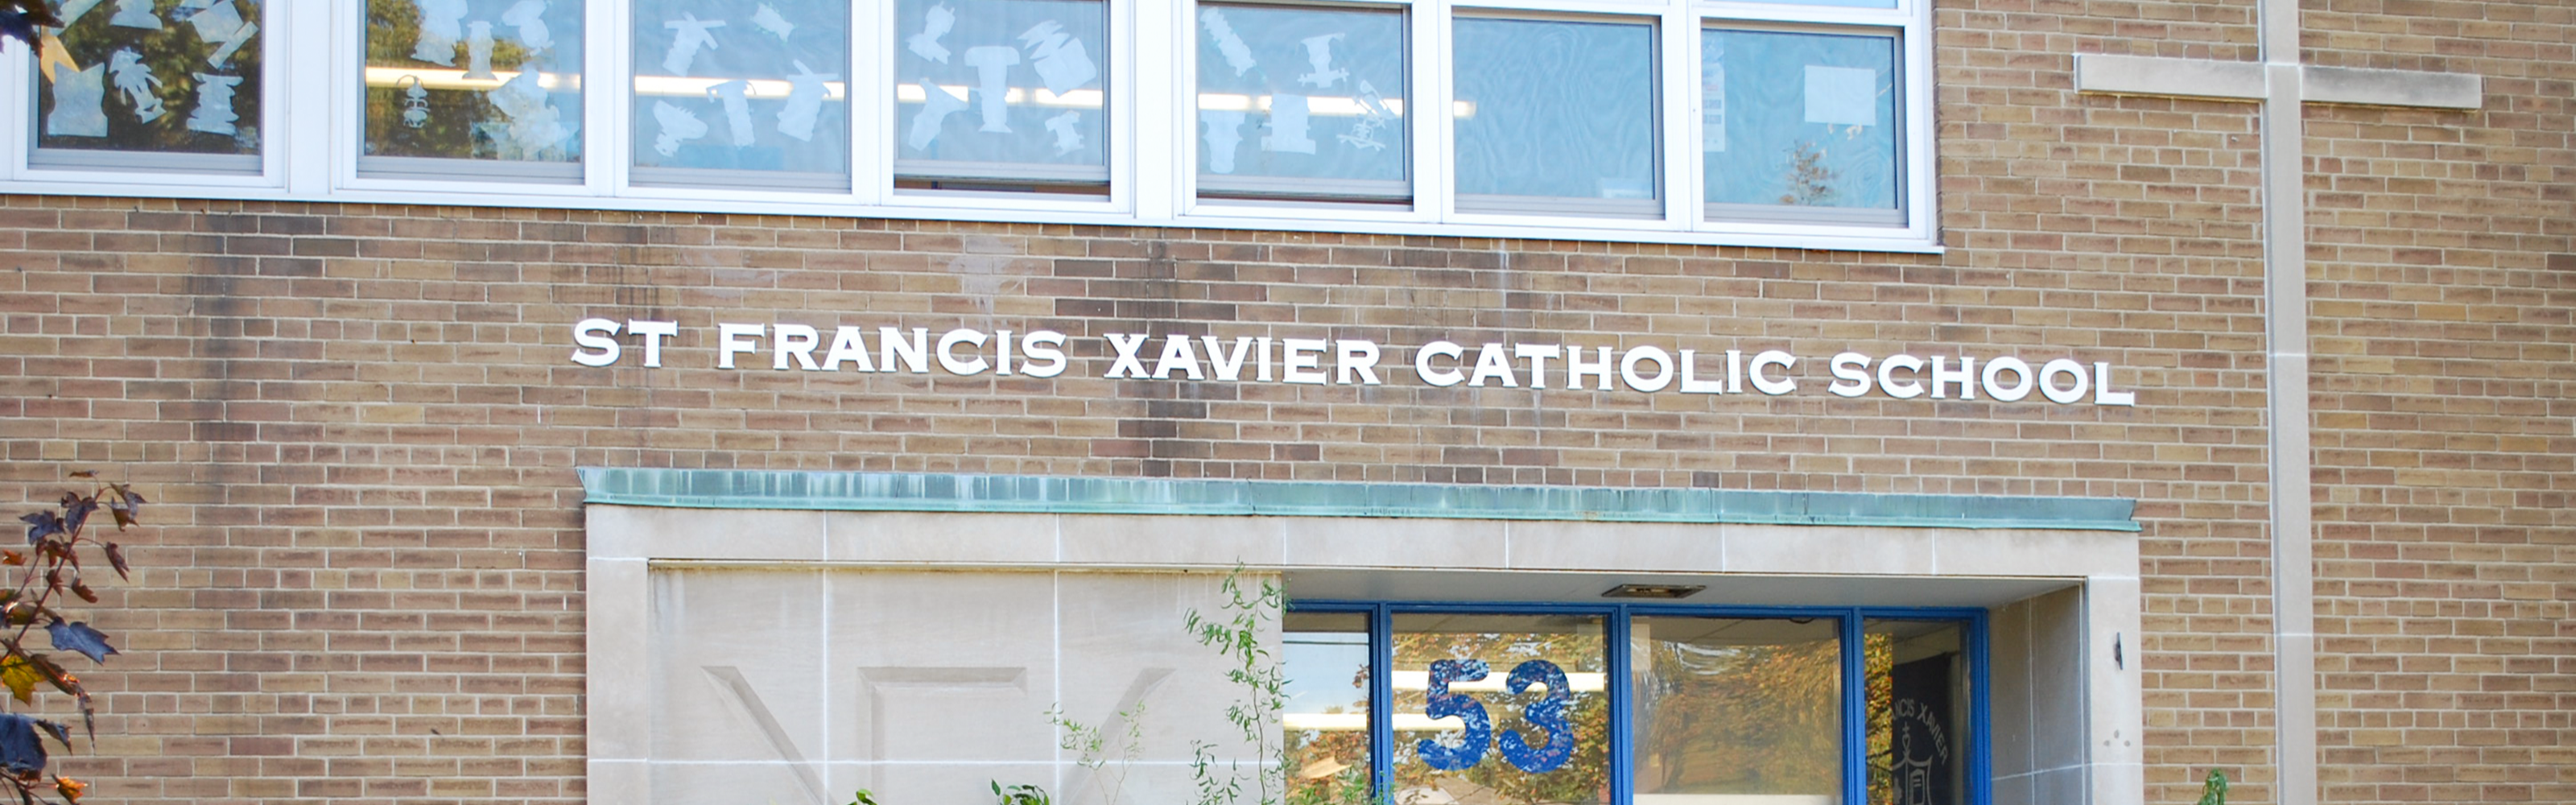 The front of the St. Francis Xavier Catholic School building.